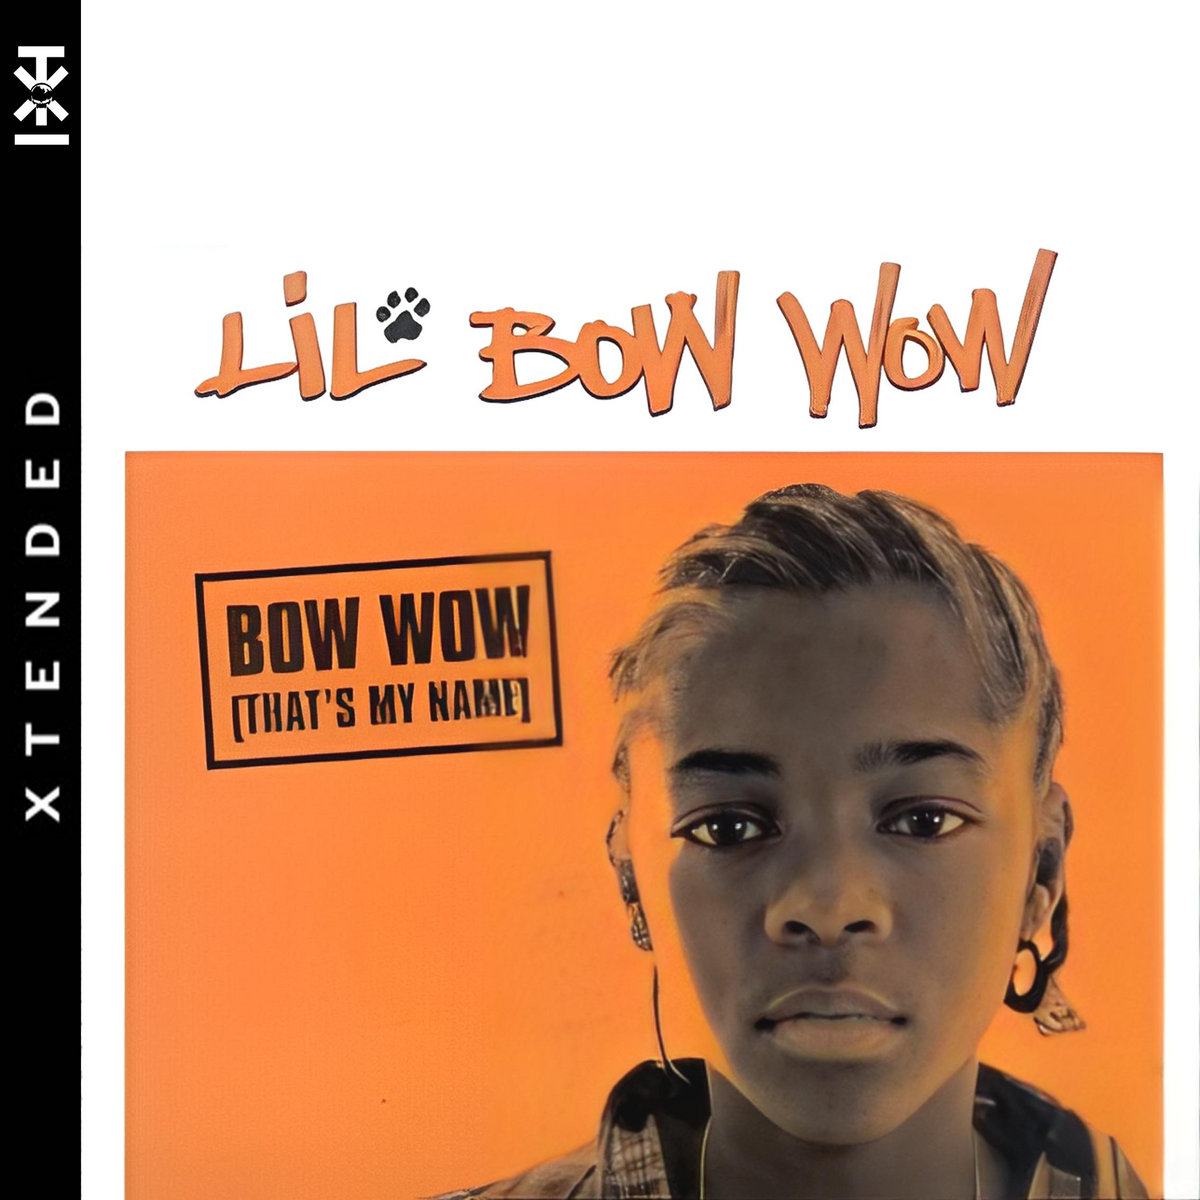 Lil’ bow wow   bow wow (that’s my name)